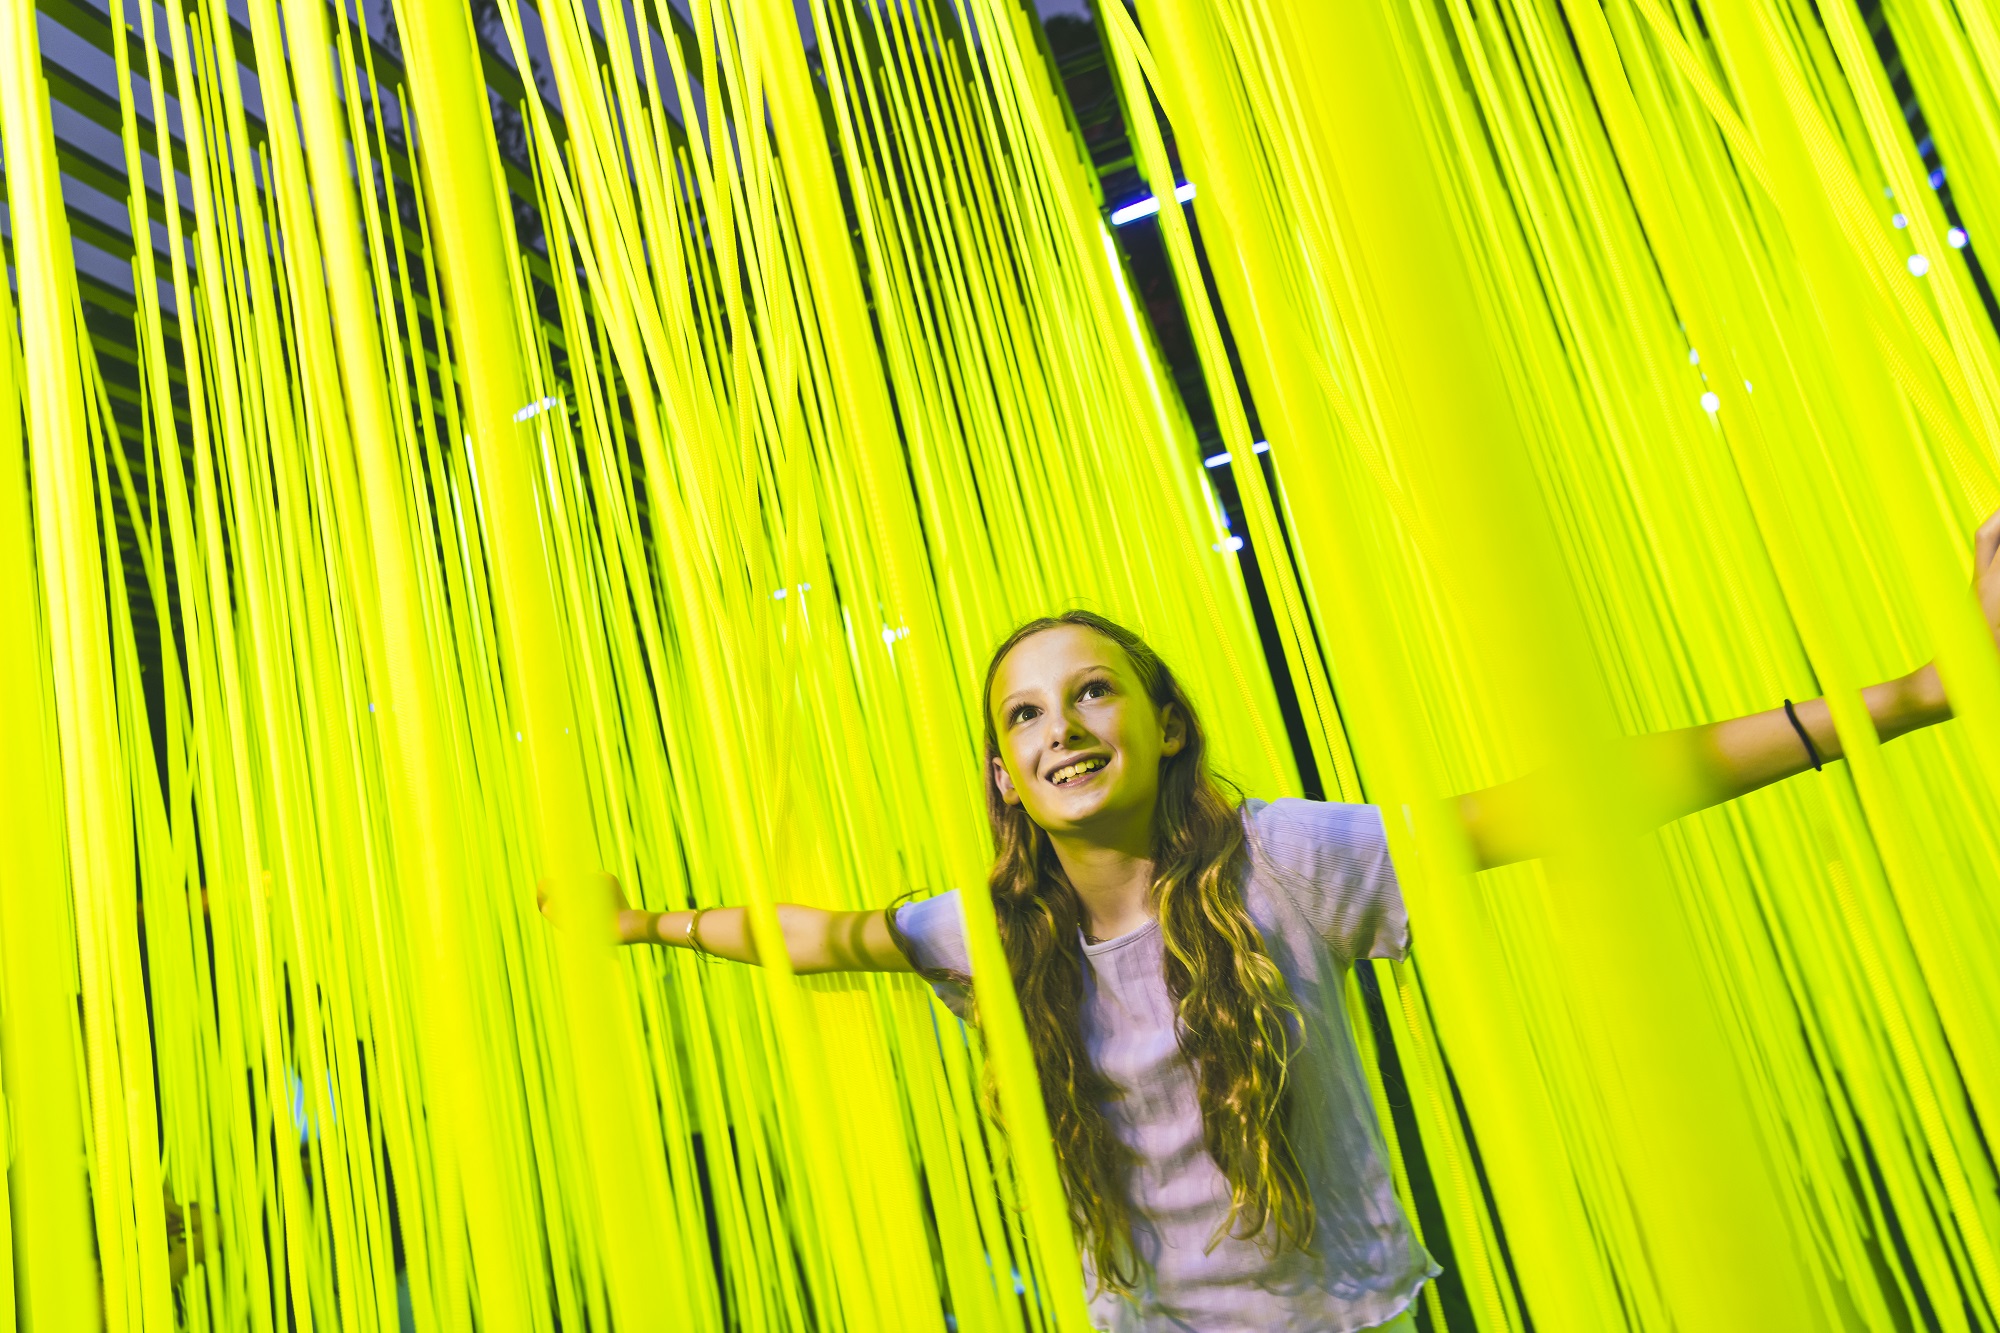 Young girl with long blond hair admidst fluorescent spagetti-type lights